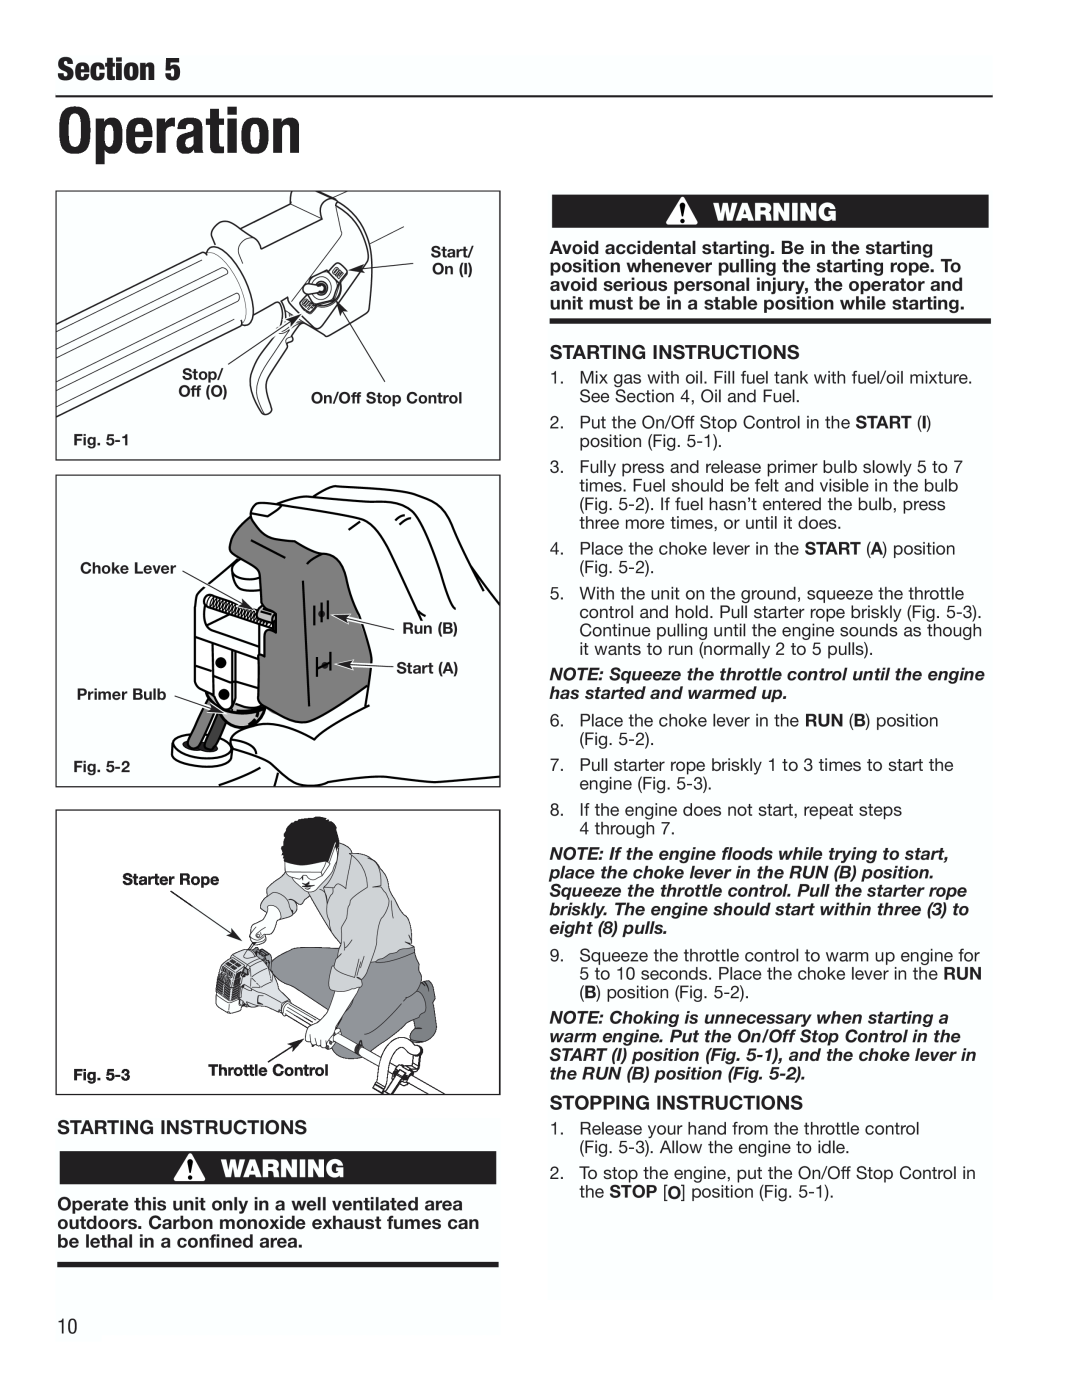 Cub Cadet CC3000 manual Operation, Section, Starting Instructions, Stopping Instructions 